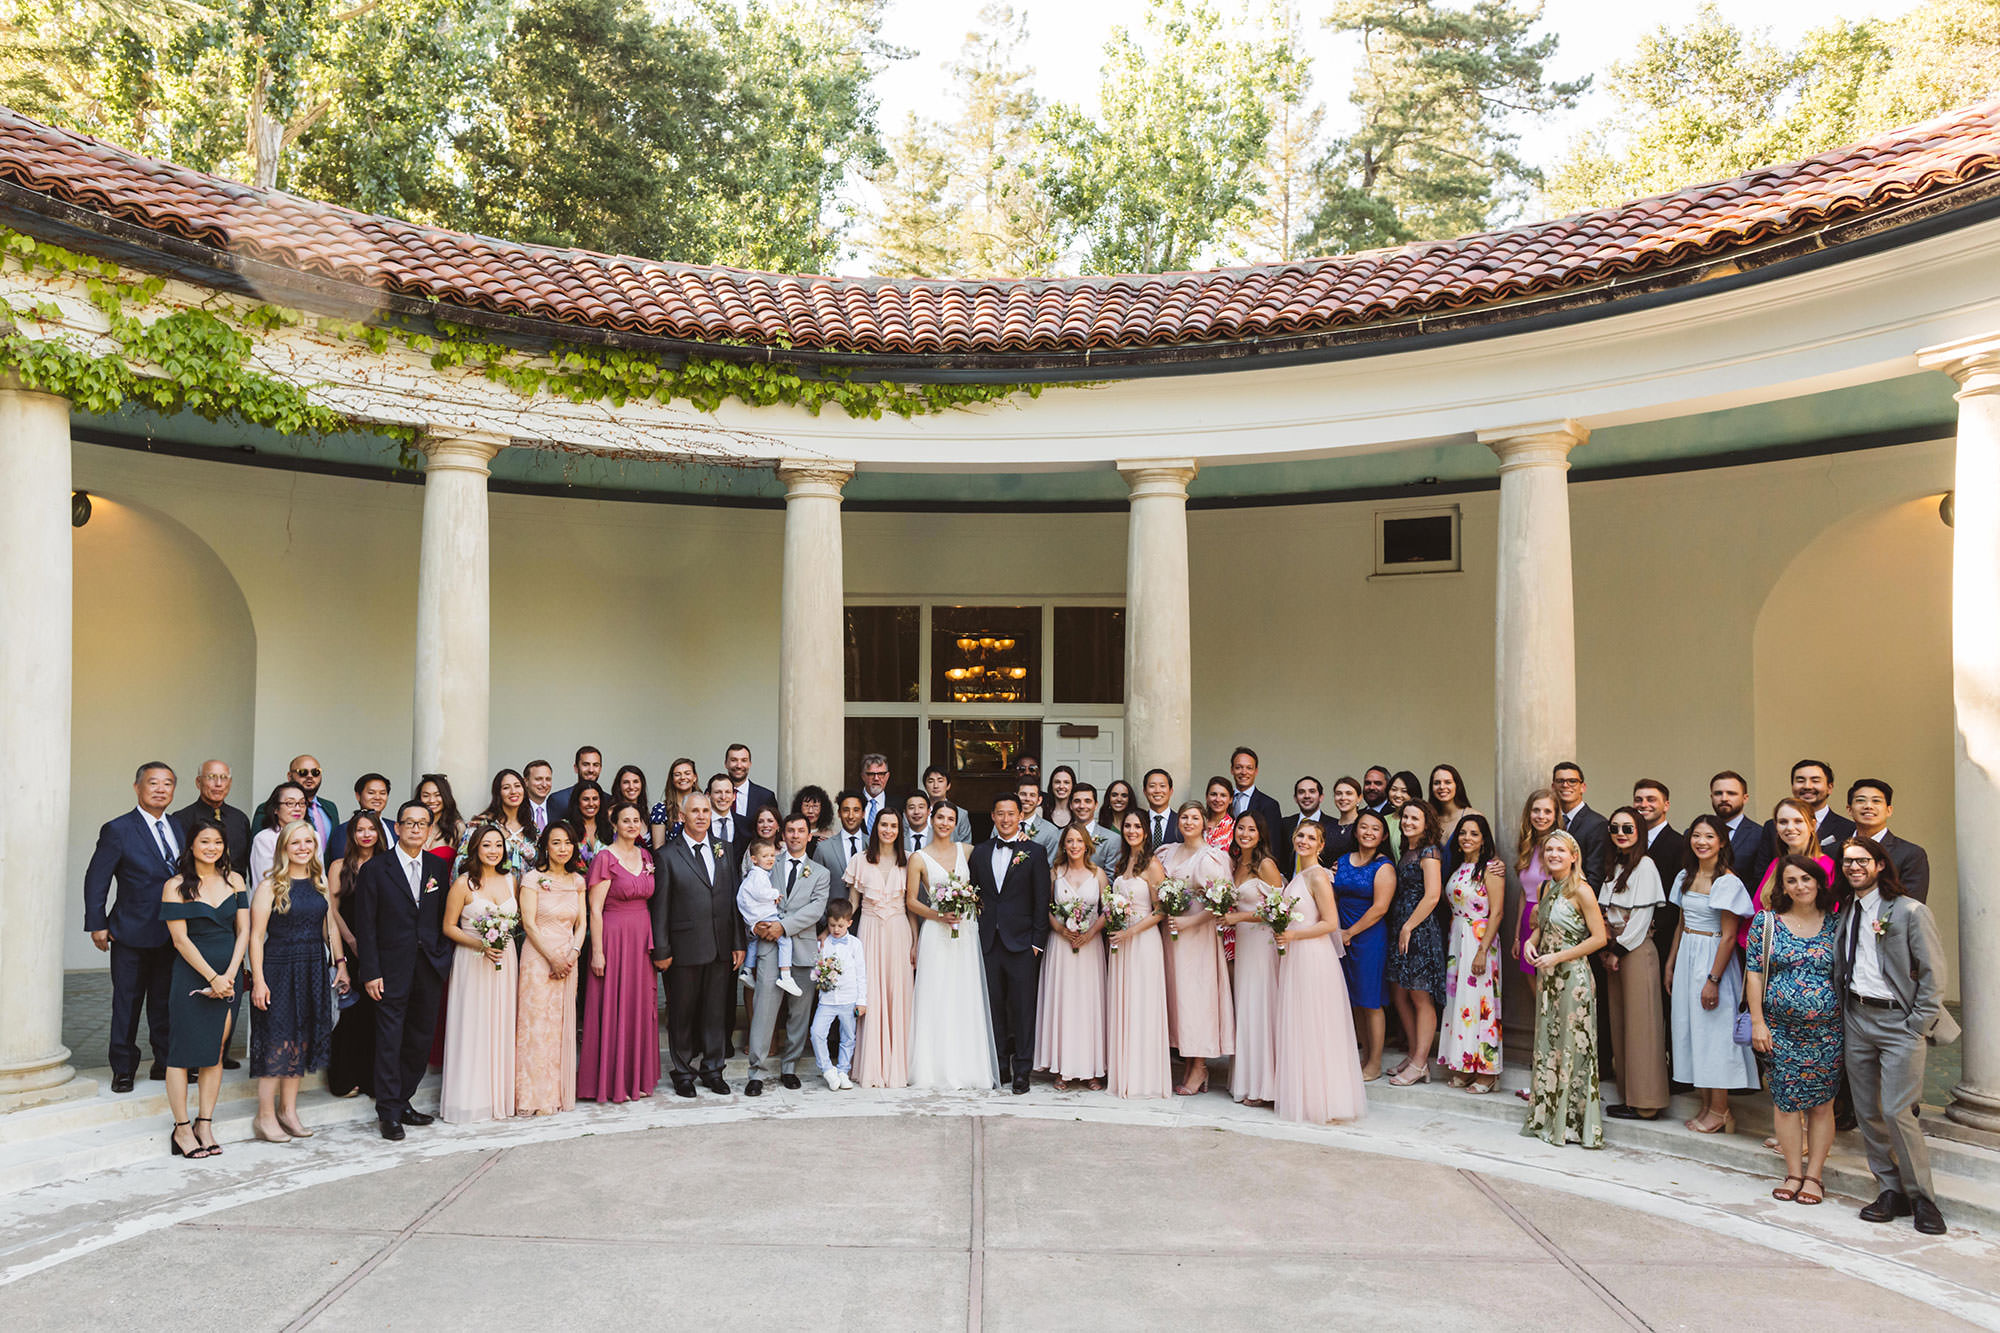 logistics of capturing photo of every guest at wedding - big group photo